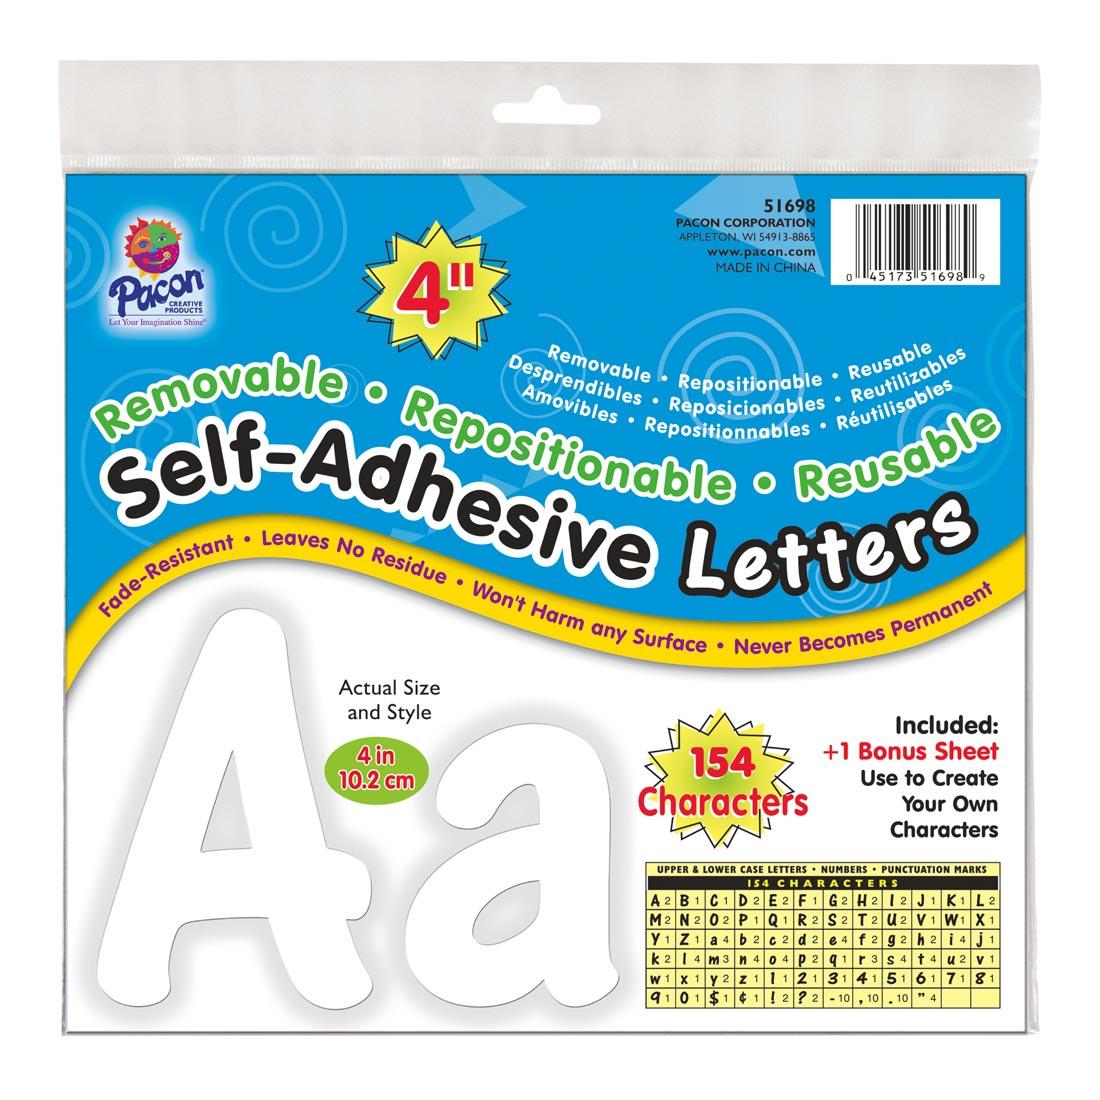 Cheery Font Black 2PK Pacon 4-inch Reusable Self-Adhesive Letters & Numbers 